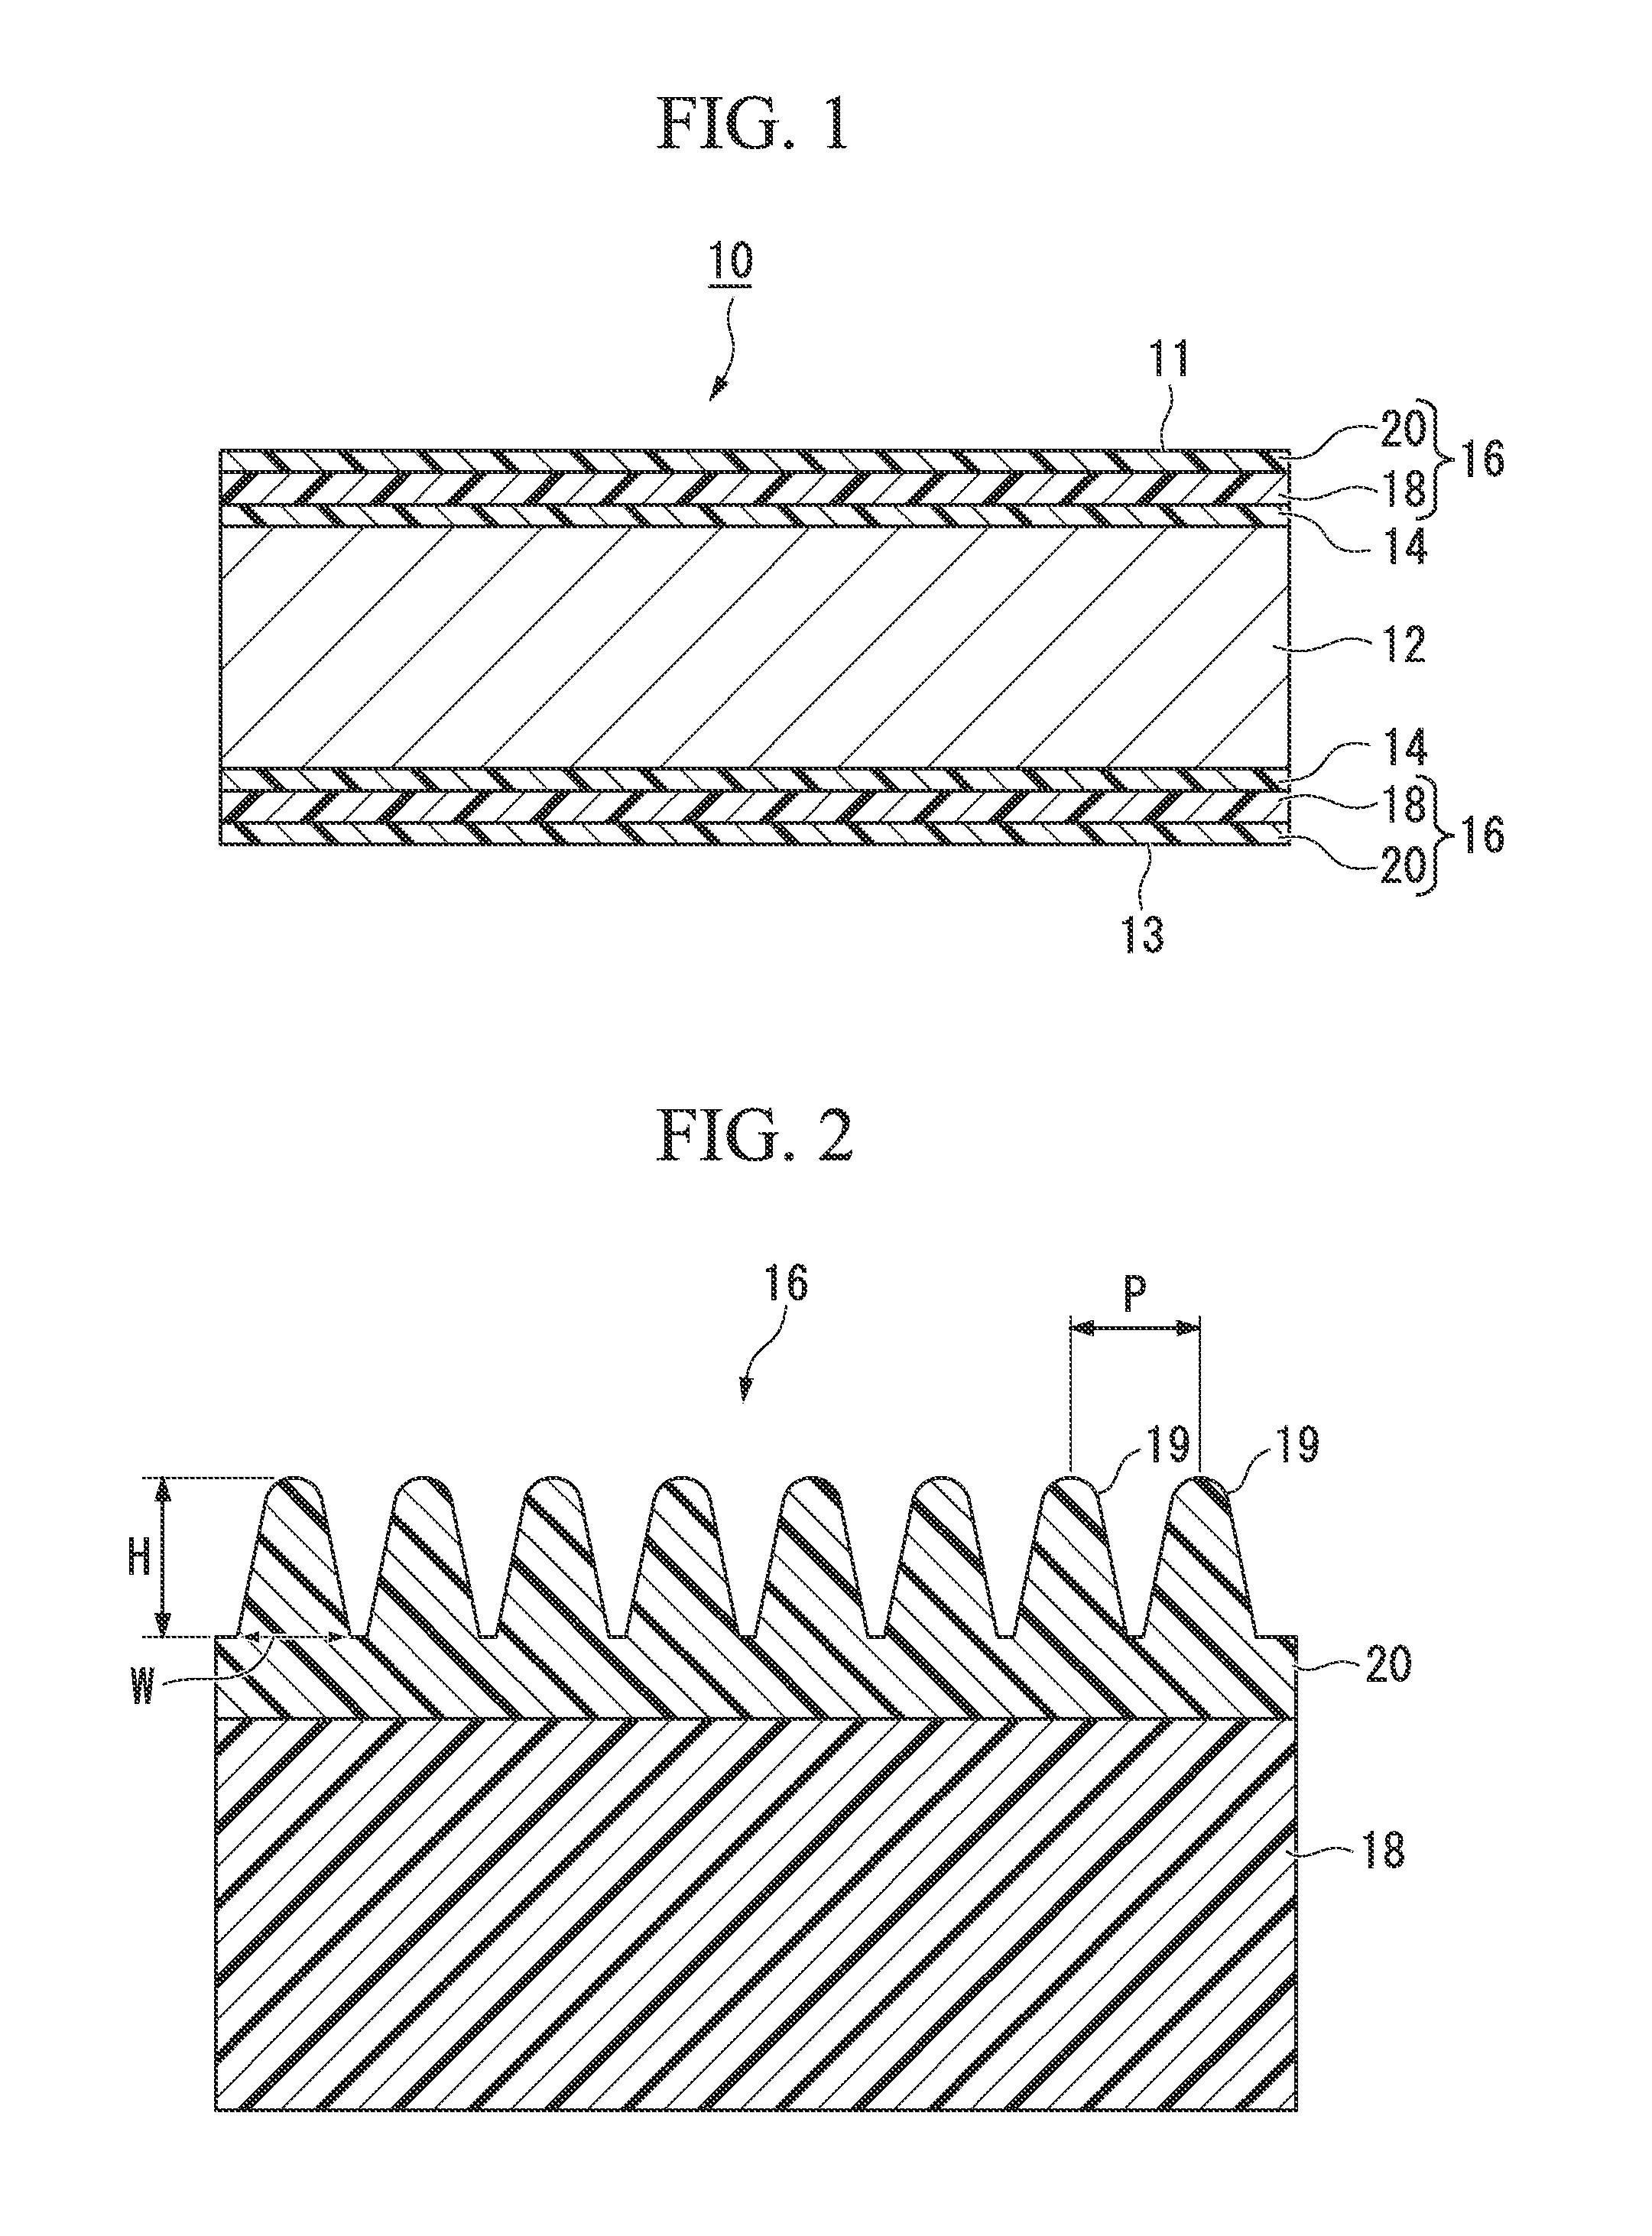 Antireflection article and display device